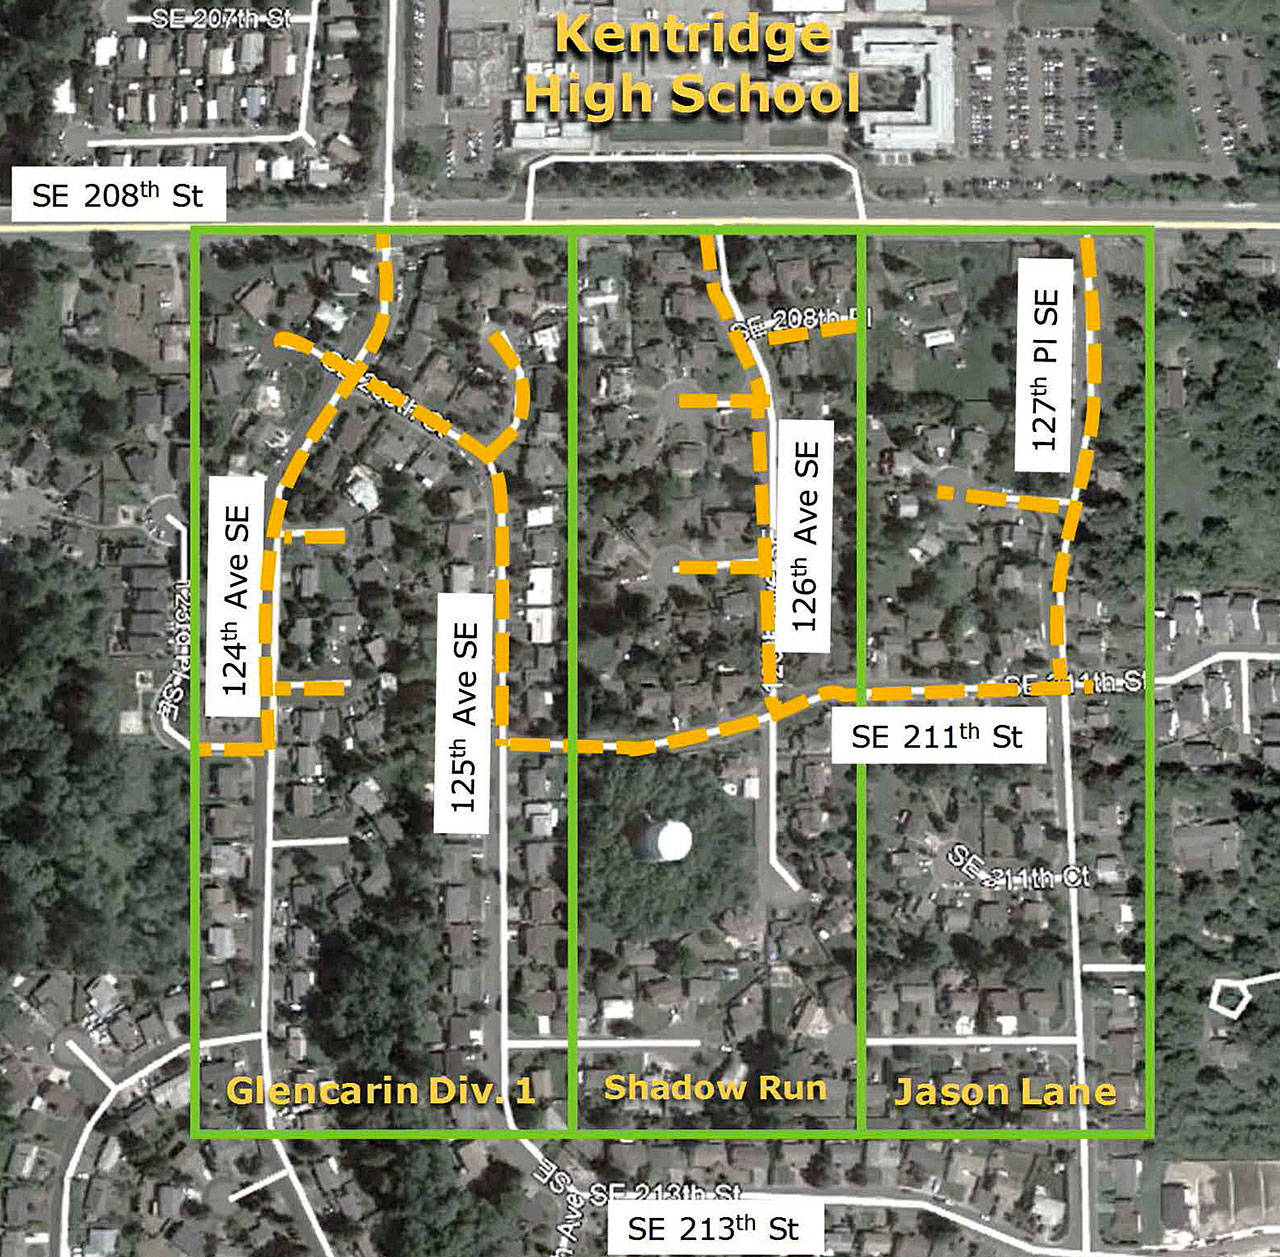 The orange-yellow line shows the city’s proposed parking zone restriction area at the neighborhoods south of Kentridge High School. COURTESY GRAPHIC, City of Kent